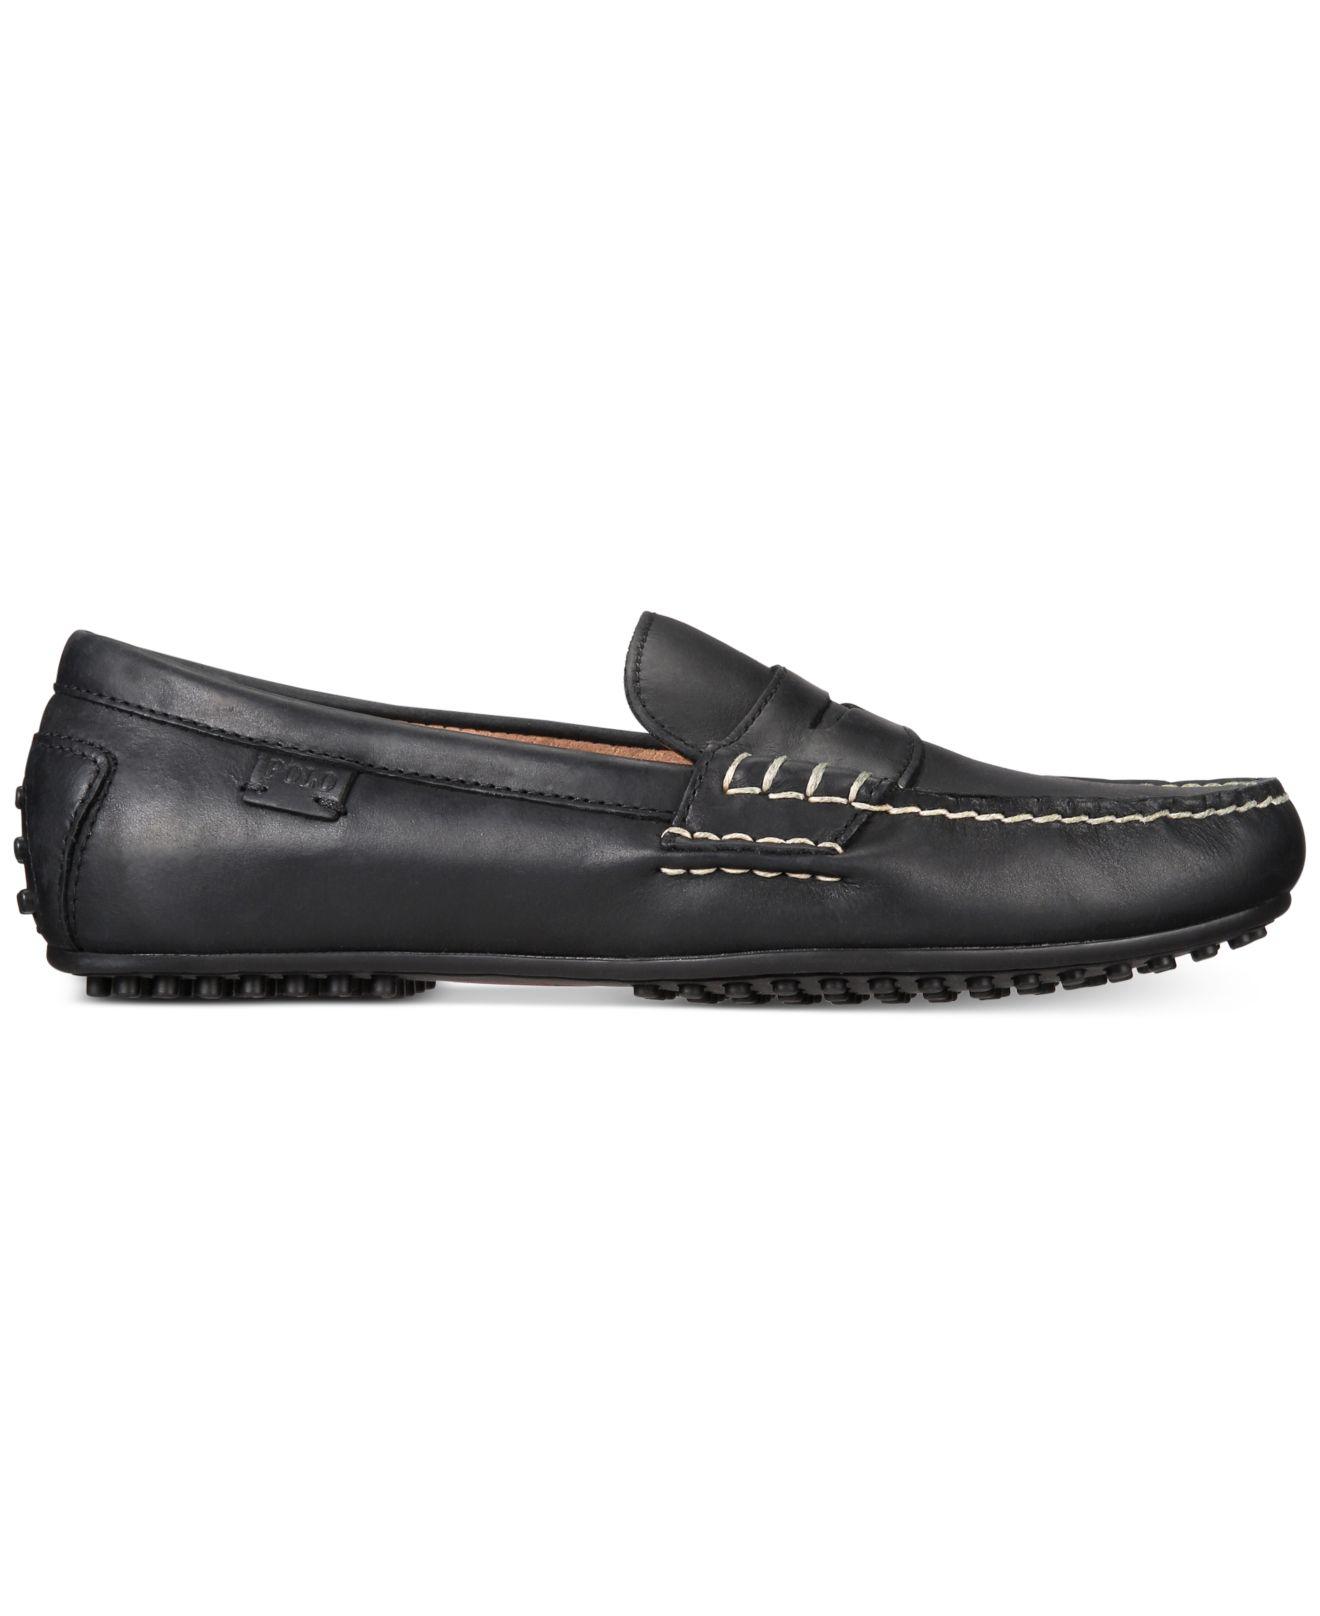 Polo Ralph Lauren Wes Penny Loafers in Black for Men - Lyst